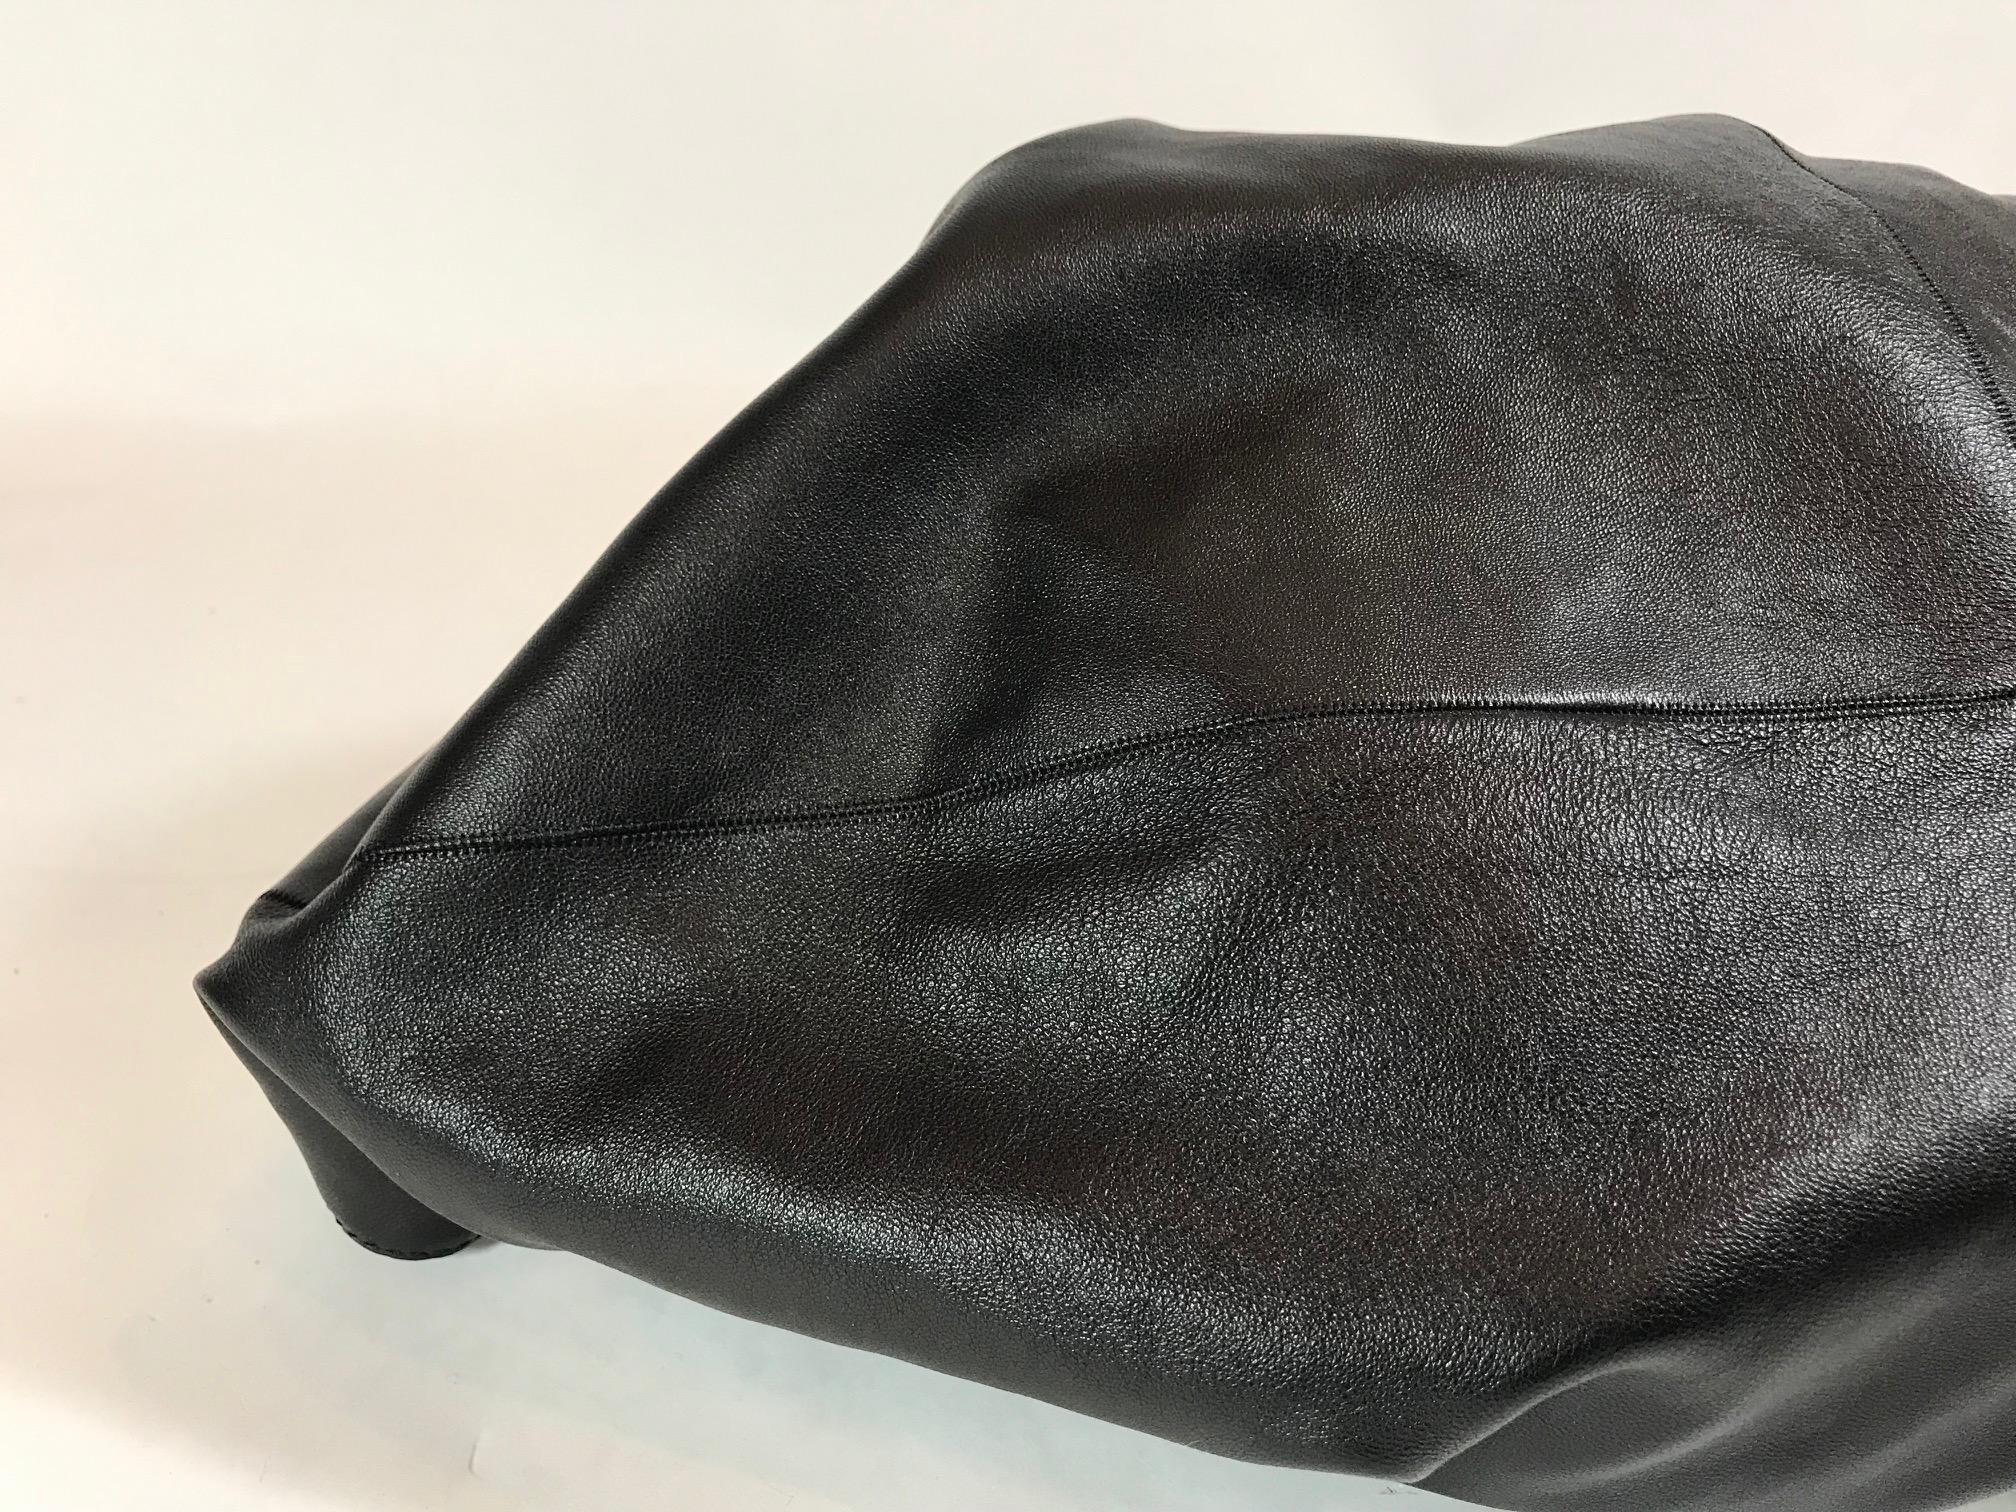 The Row Medium Ascot Knot Bag In Excellent Condition For Sale In Roslyn, NY